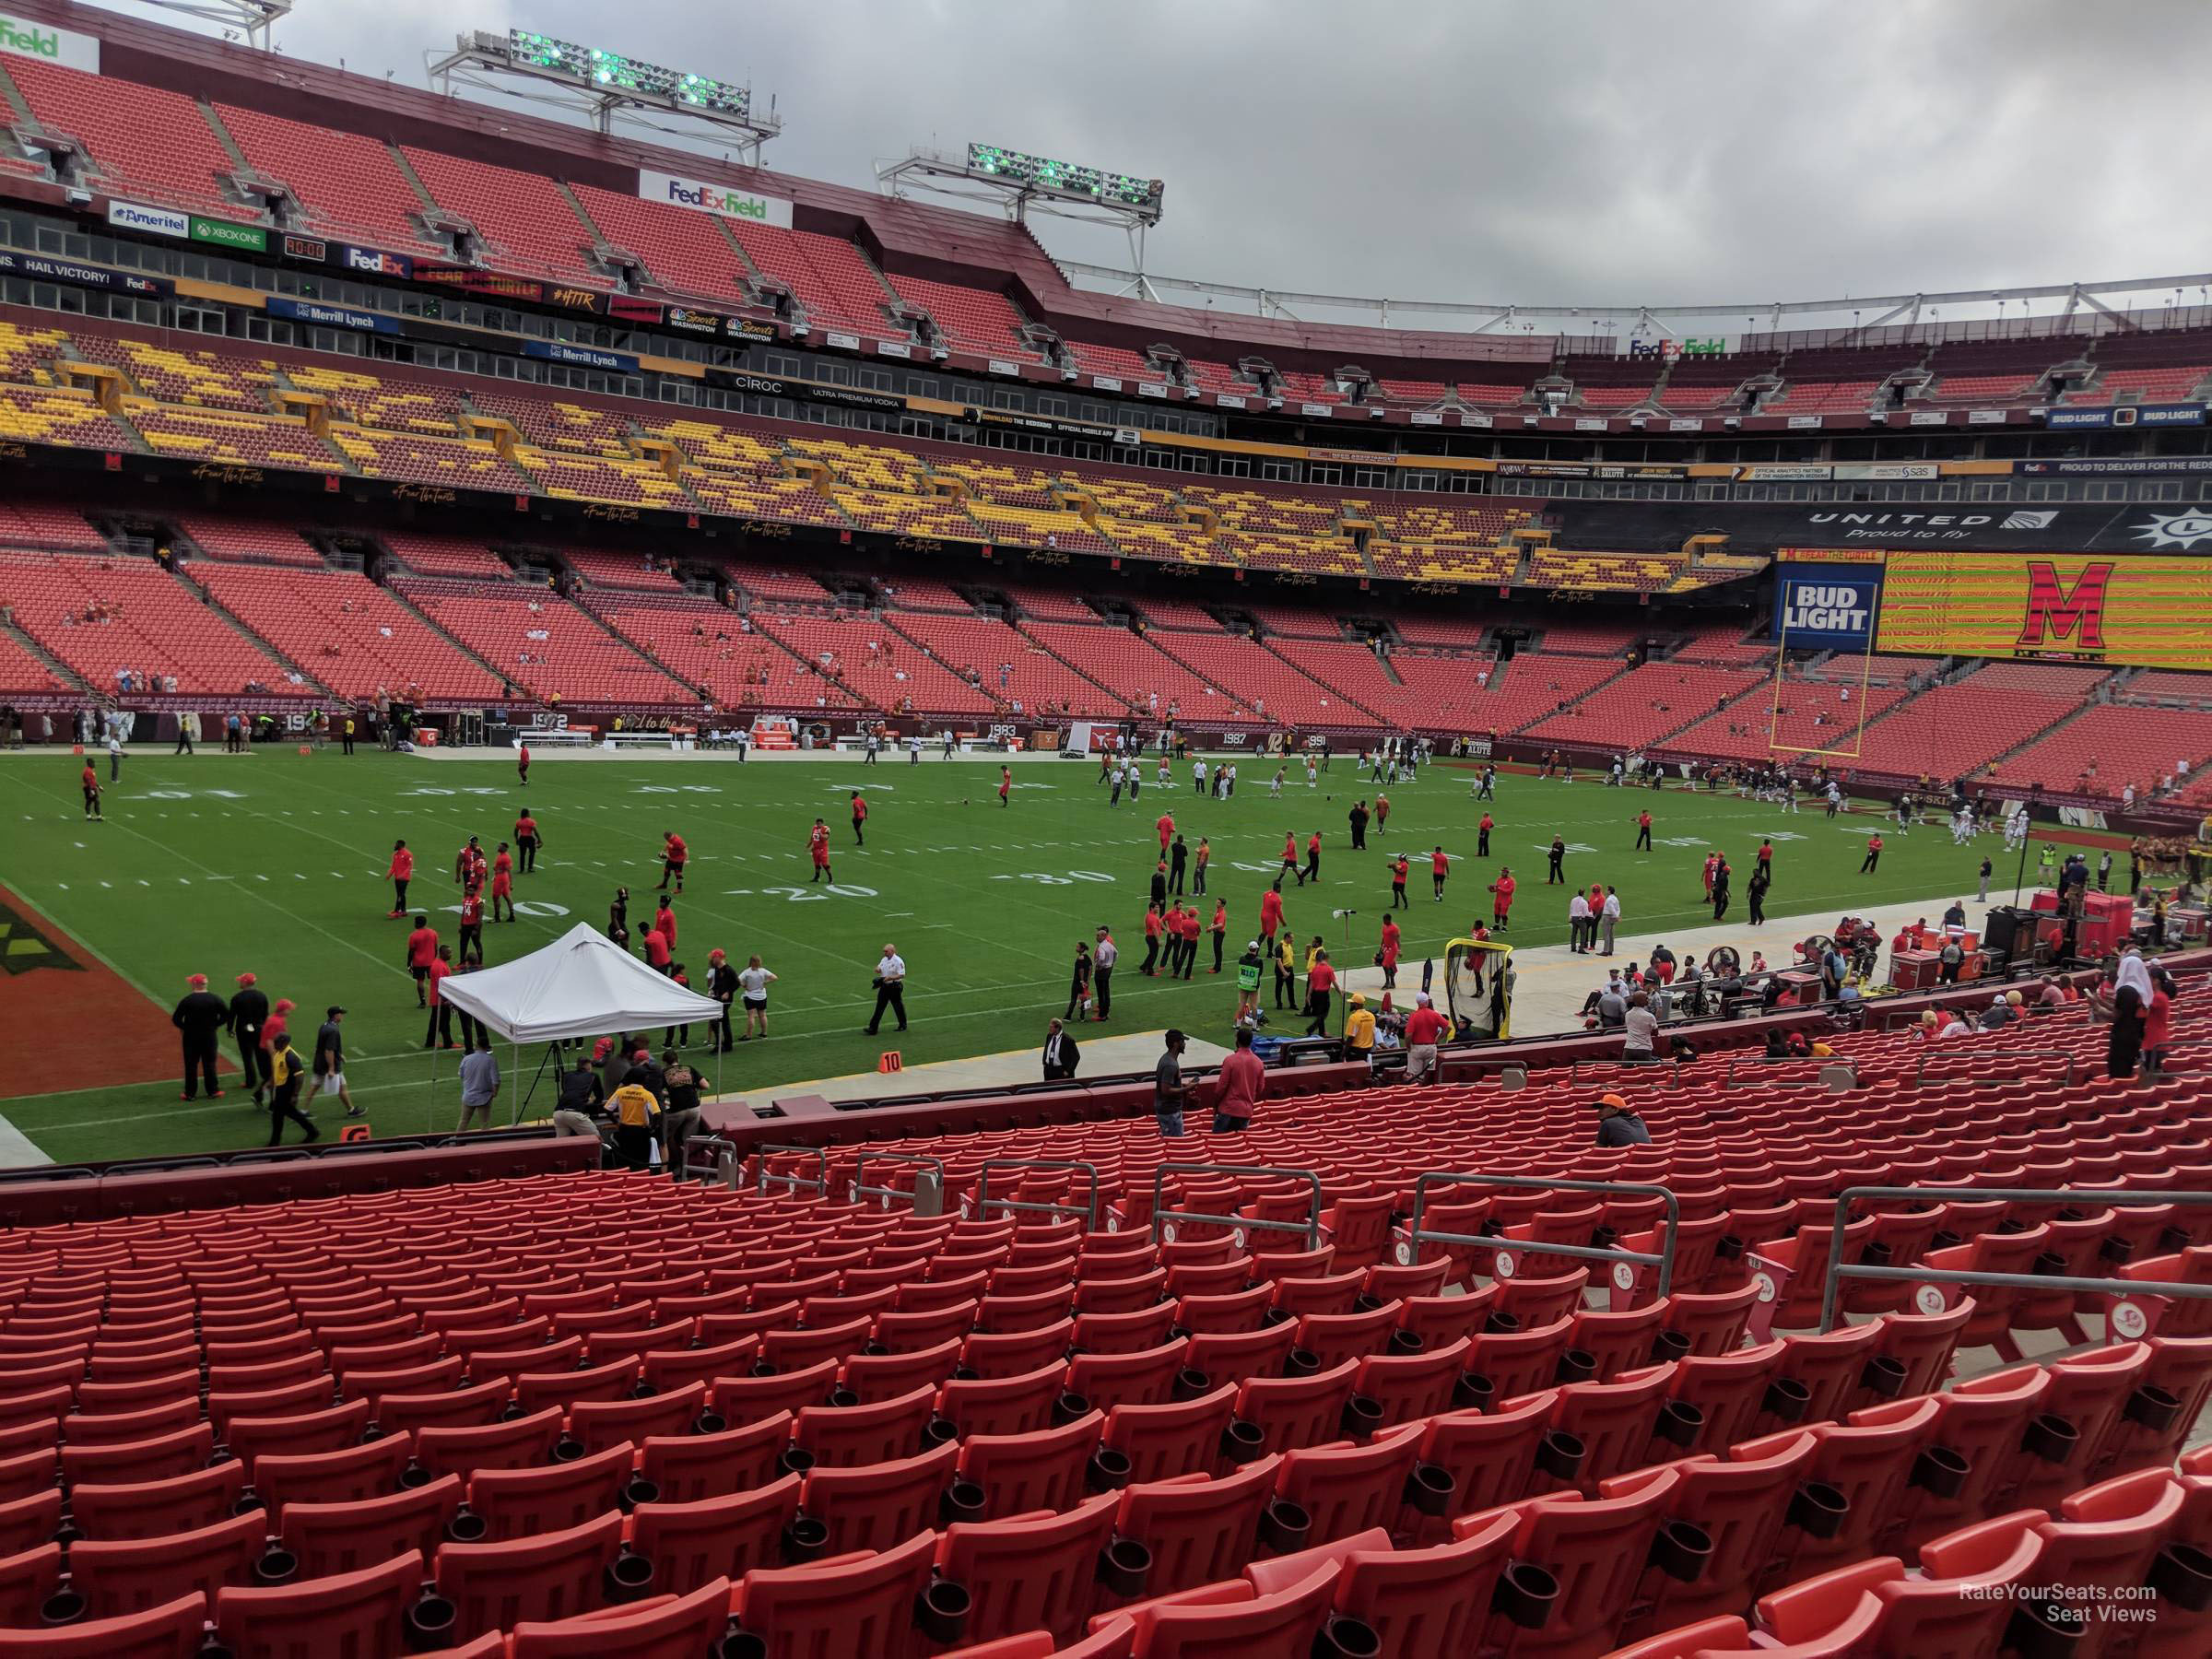 section 105, row 25 seat view  - fedexfield